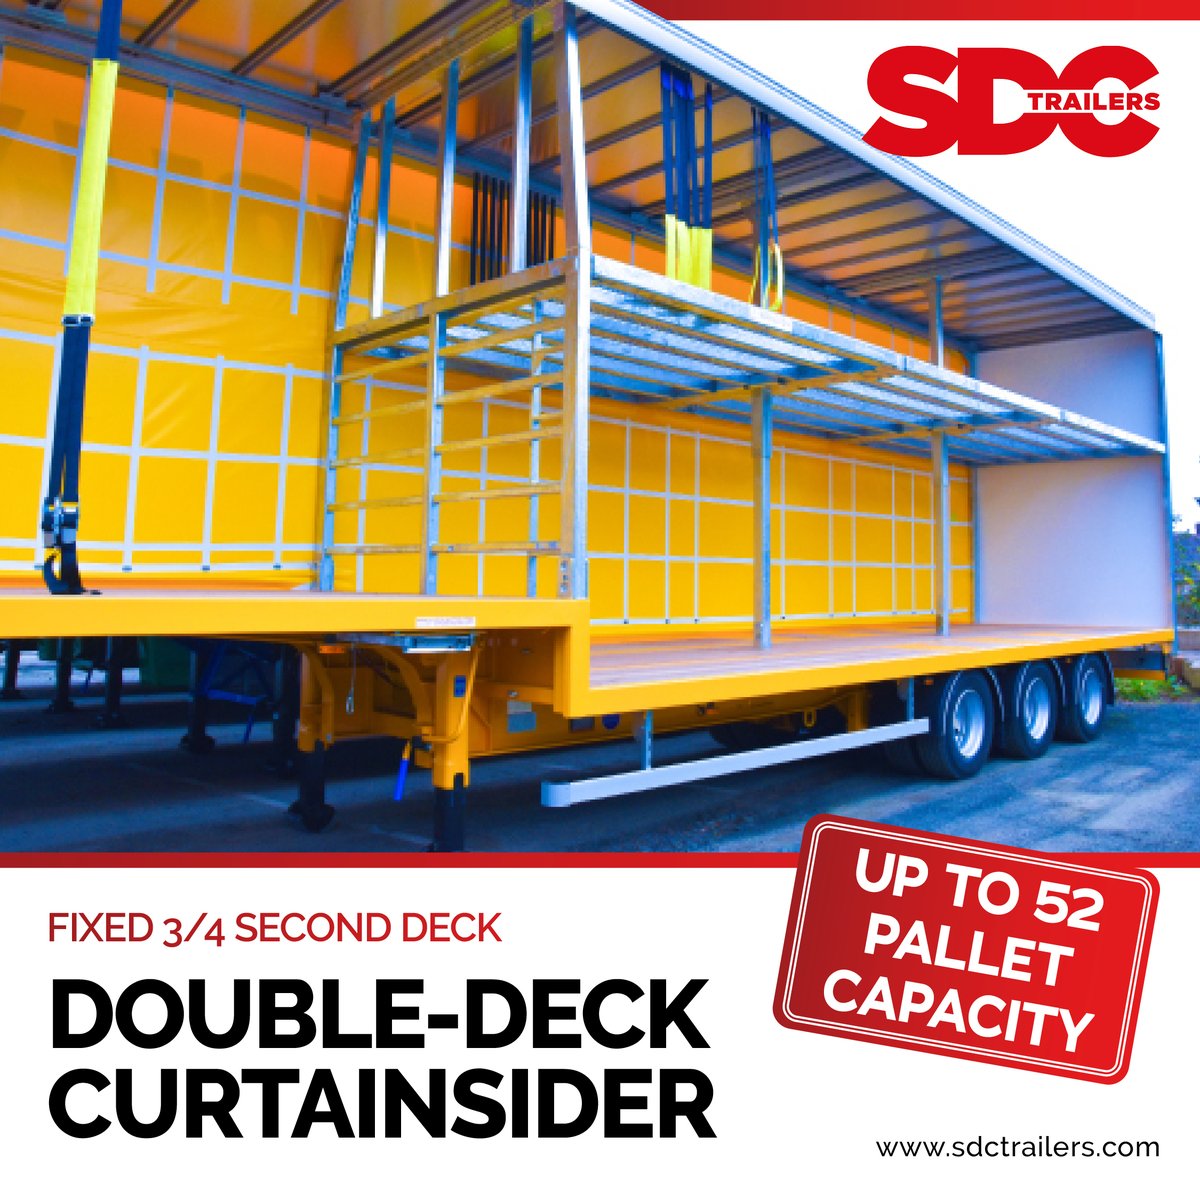 A peek inside SDC’s Double-Deck Curtainsider… Our ¾ mesh deck option provides operators with up to 52 pallet carrying capacity, reducing the number of journeys by half. 🚛 Our experienced engineers can customise the overall height and deck split to suit your requirements. 📏